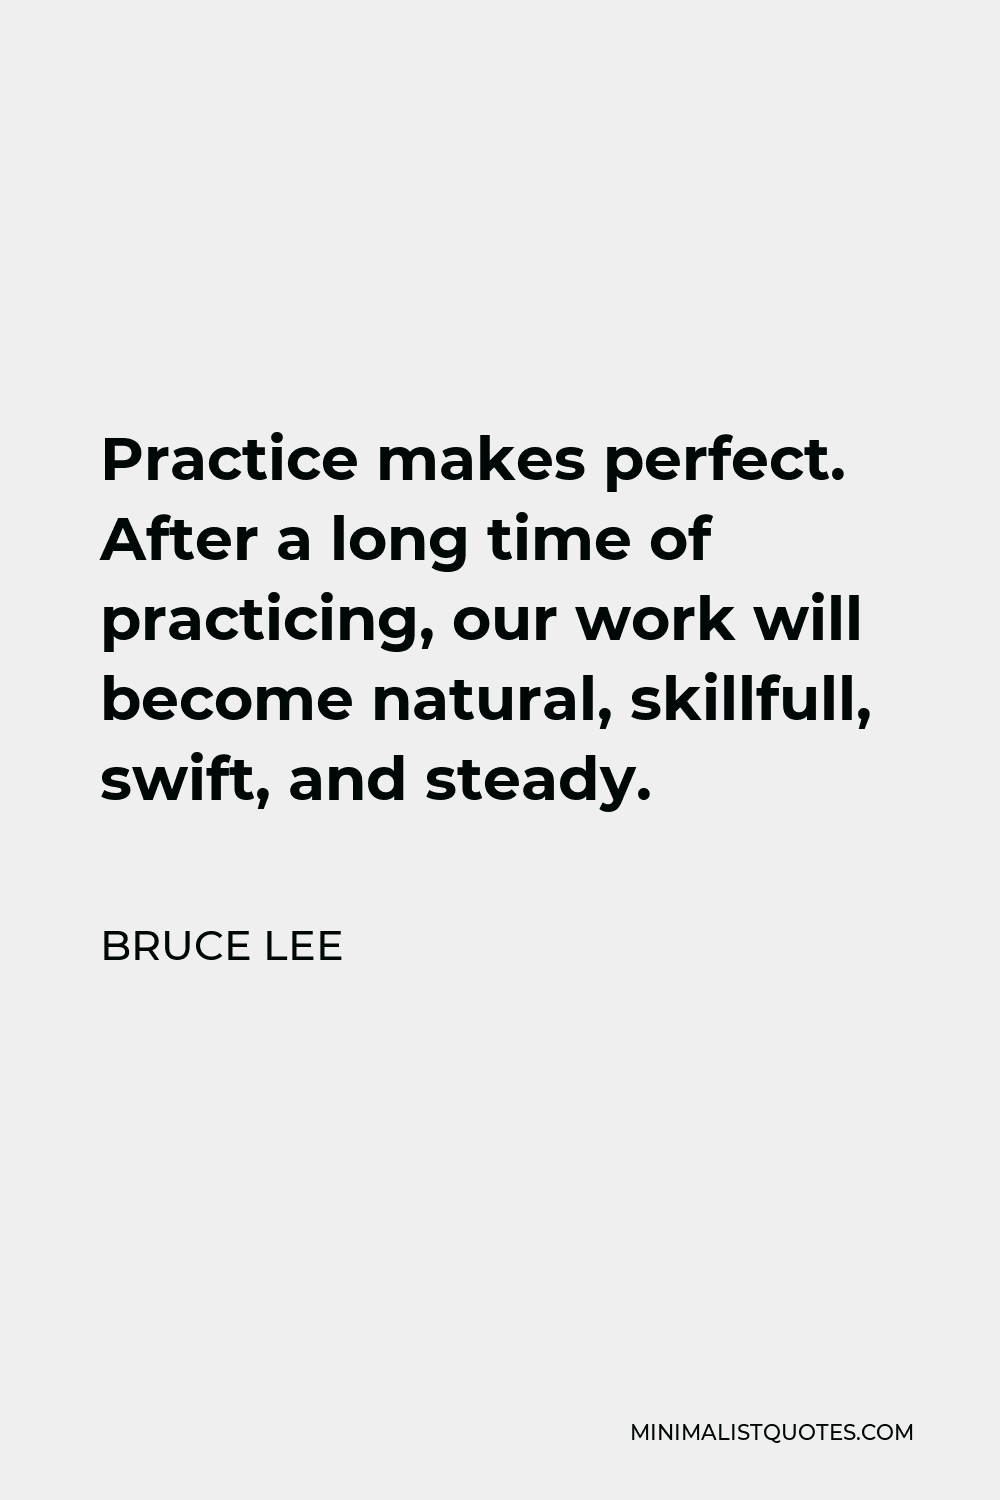 Bruce Lee Quote - Practice makes perfect. After a long time of practicing, our work will become natural, skillfull, swift, and steady.